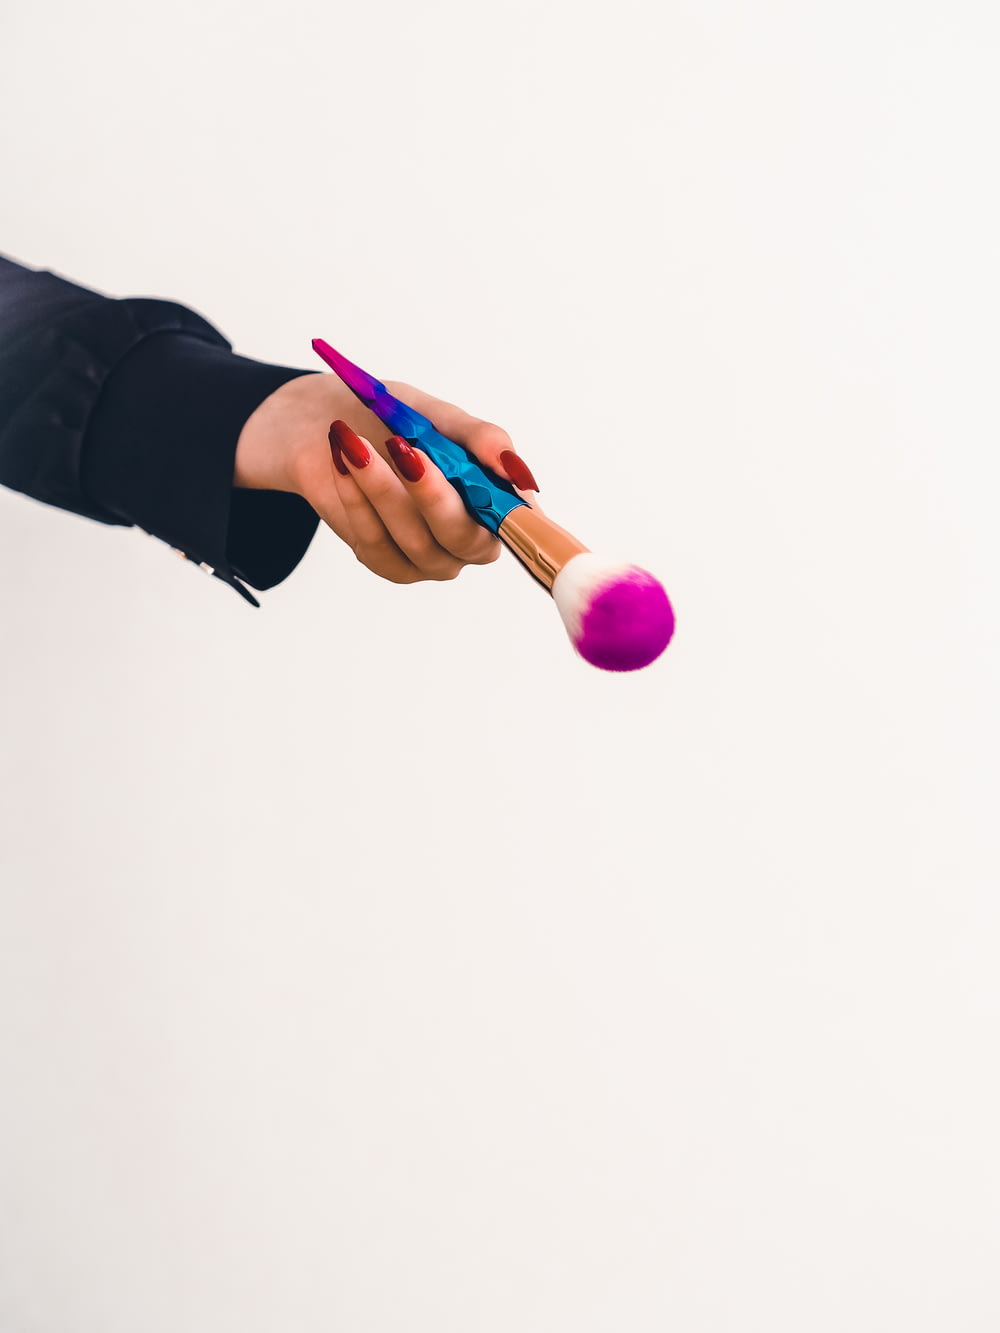 person holding pink and blue plastic toy